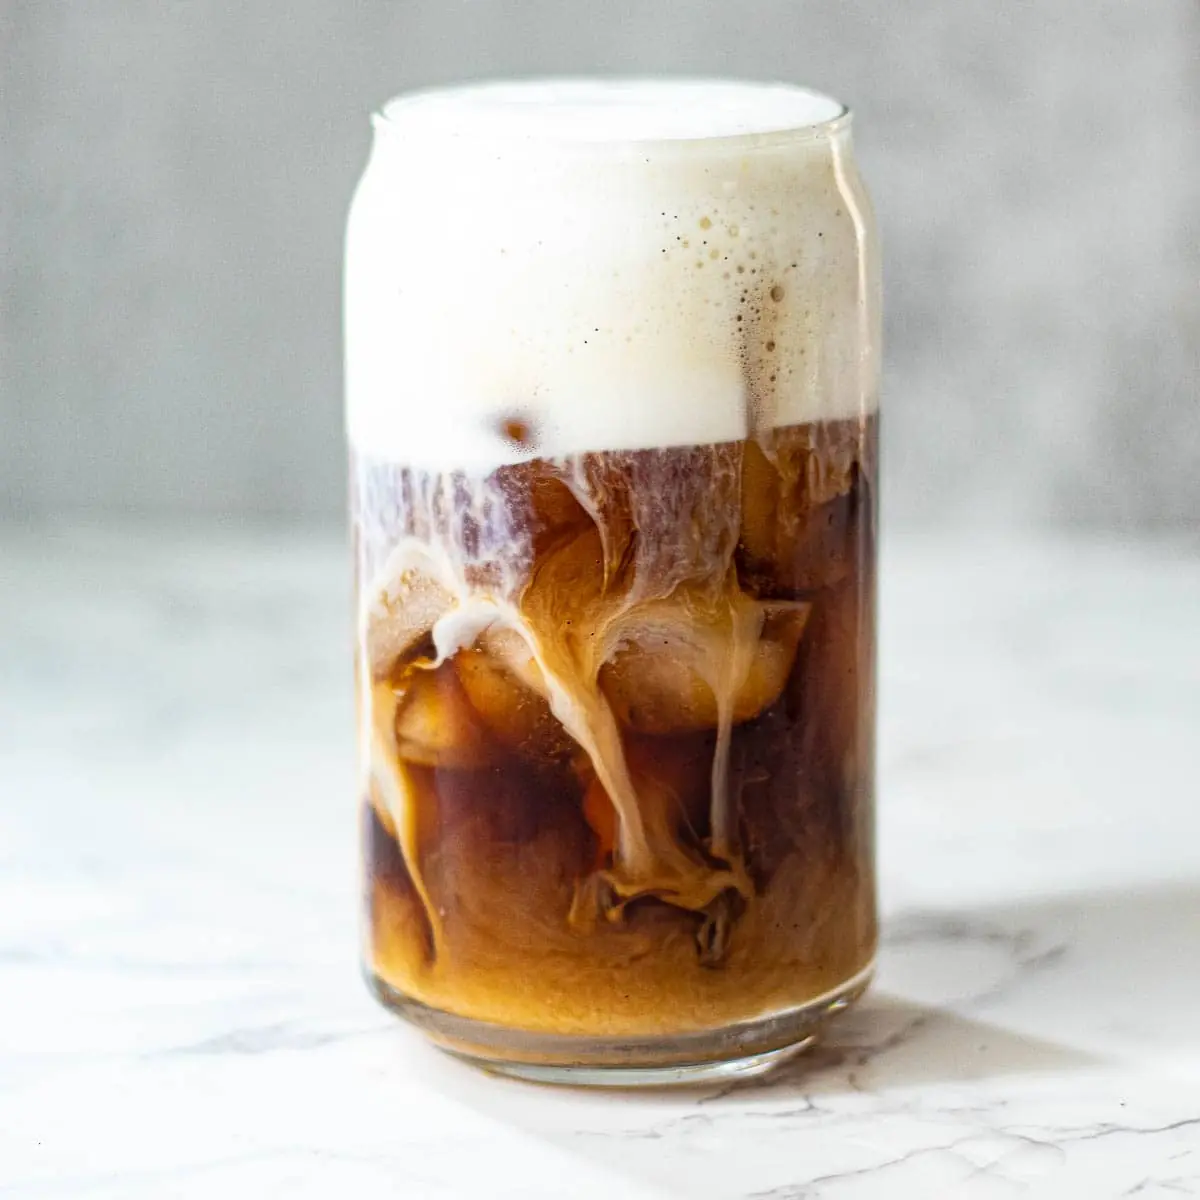 How to Make Cold Foam for Coffee from Starbucks at Home